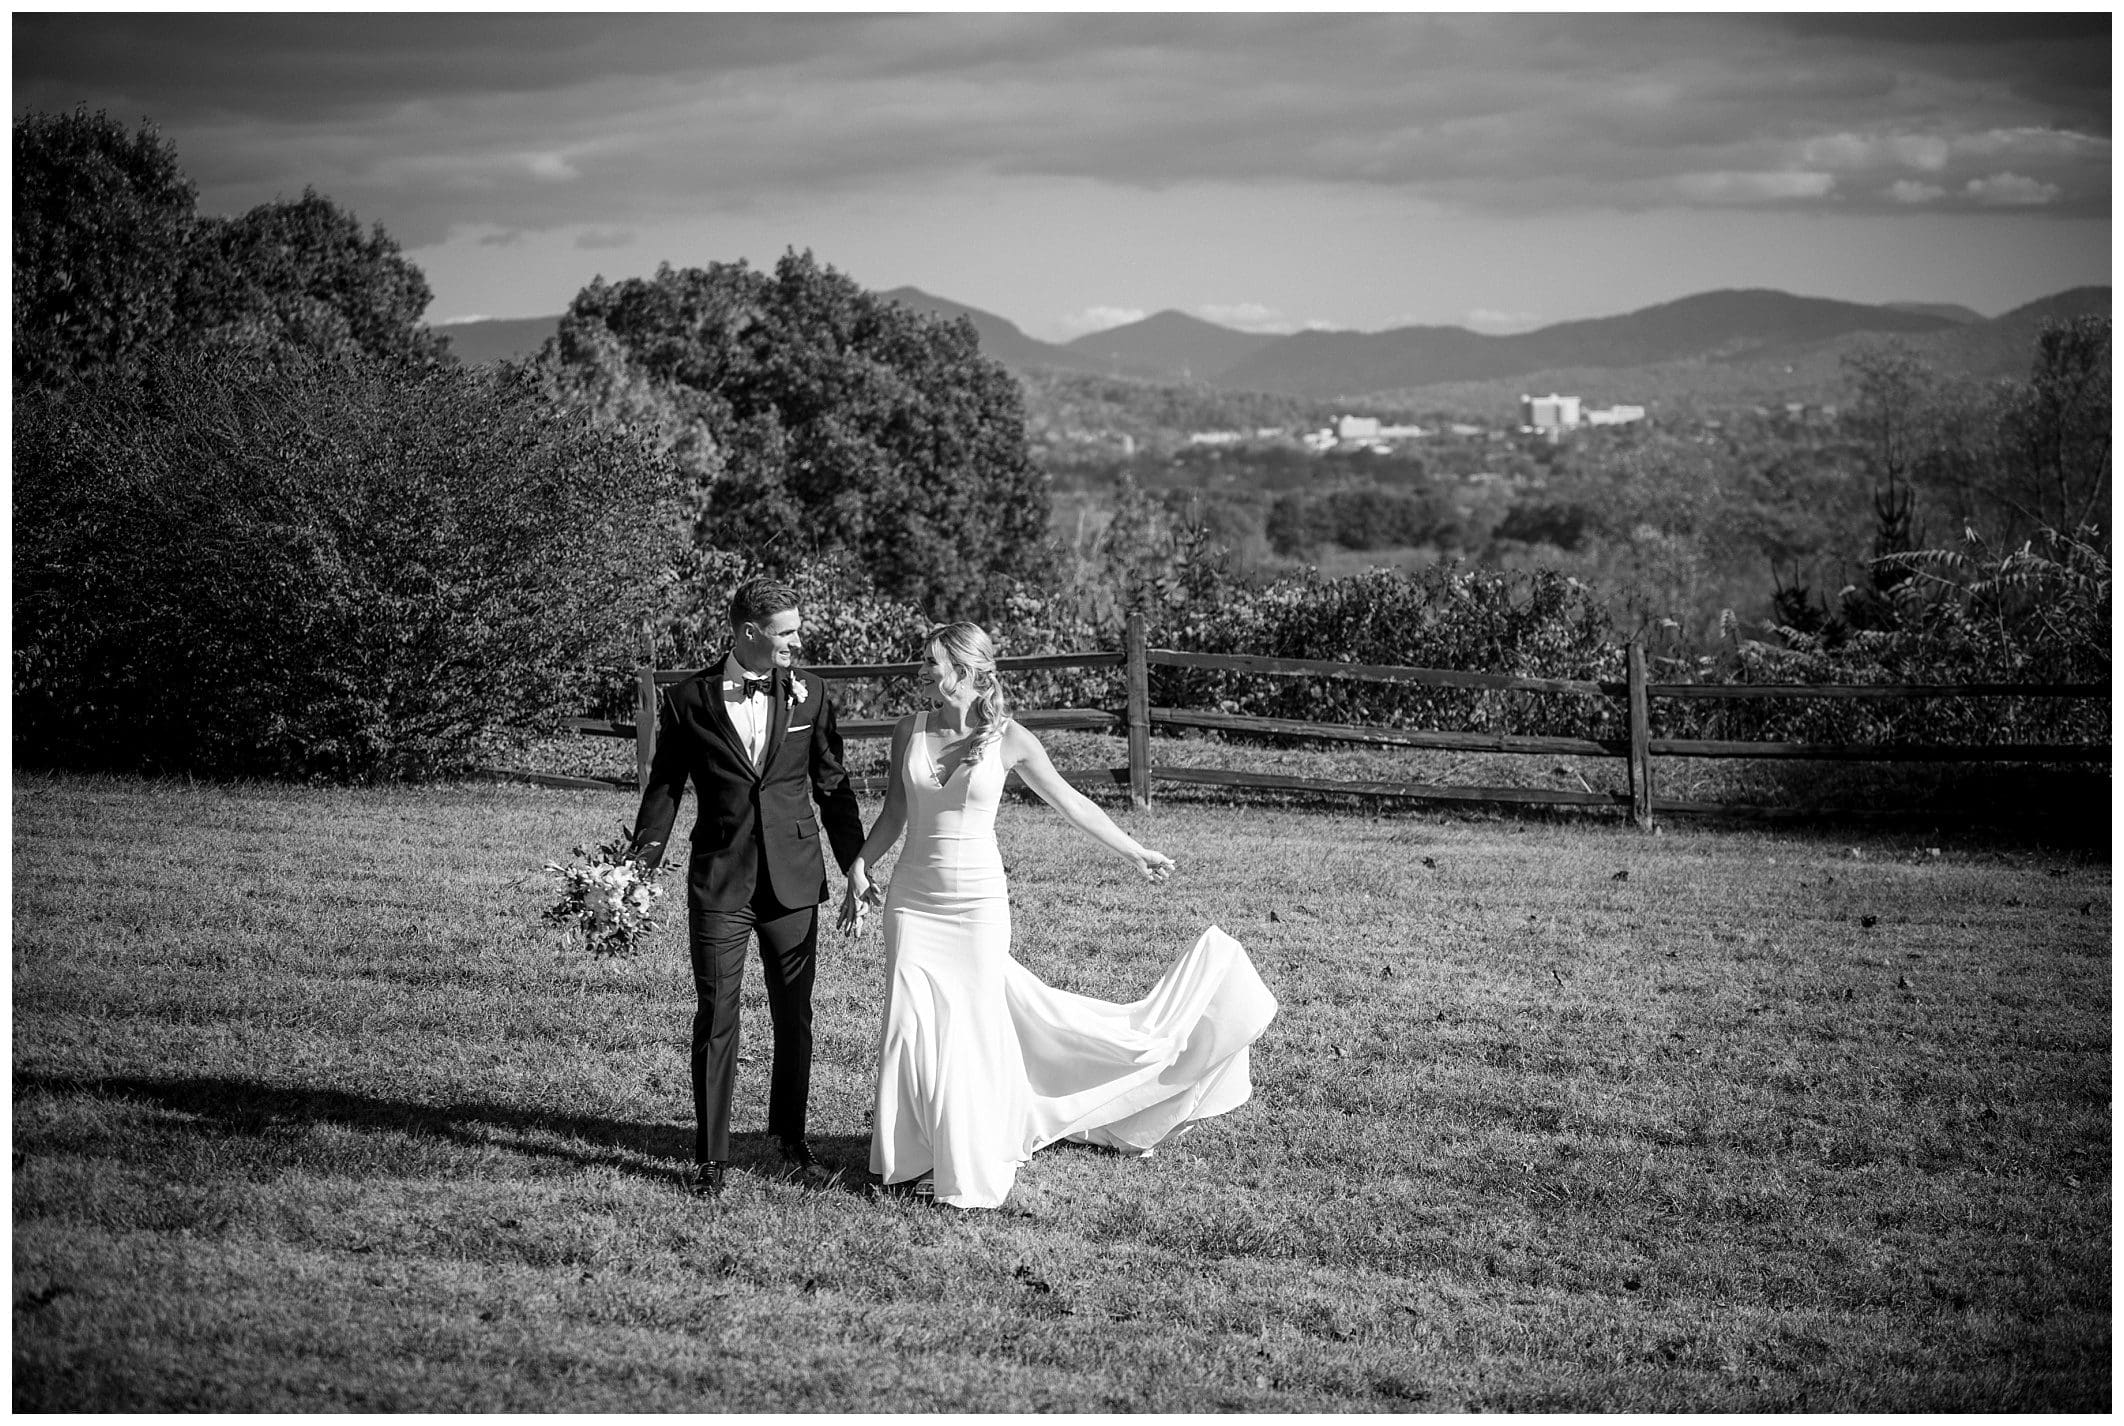 A bride and groom having a fall wedding at Crest Center, standing in a field with mountains in the background.